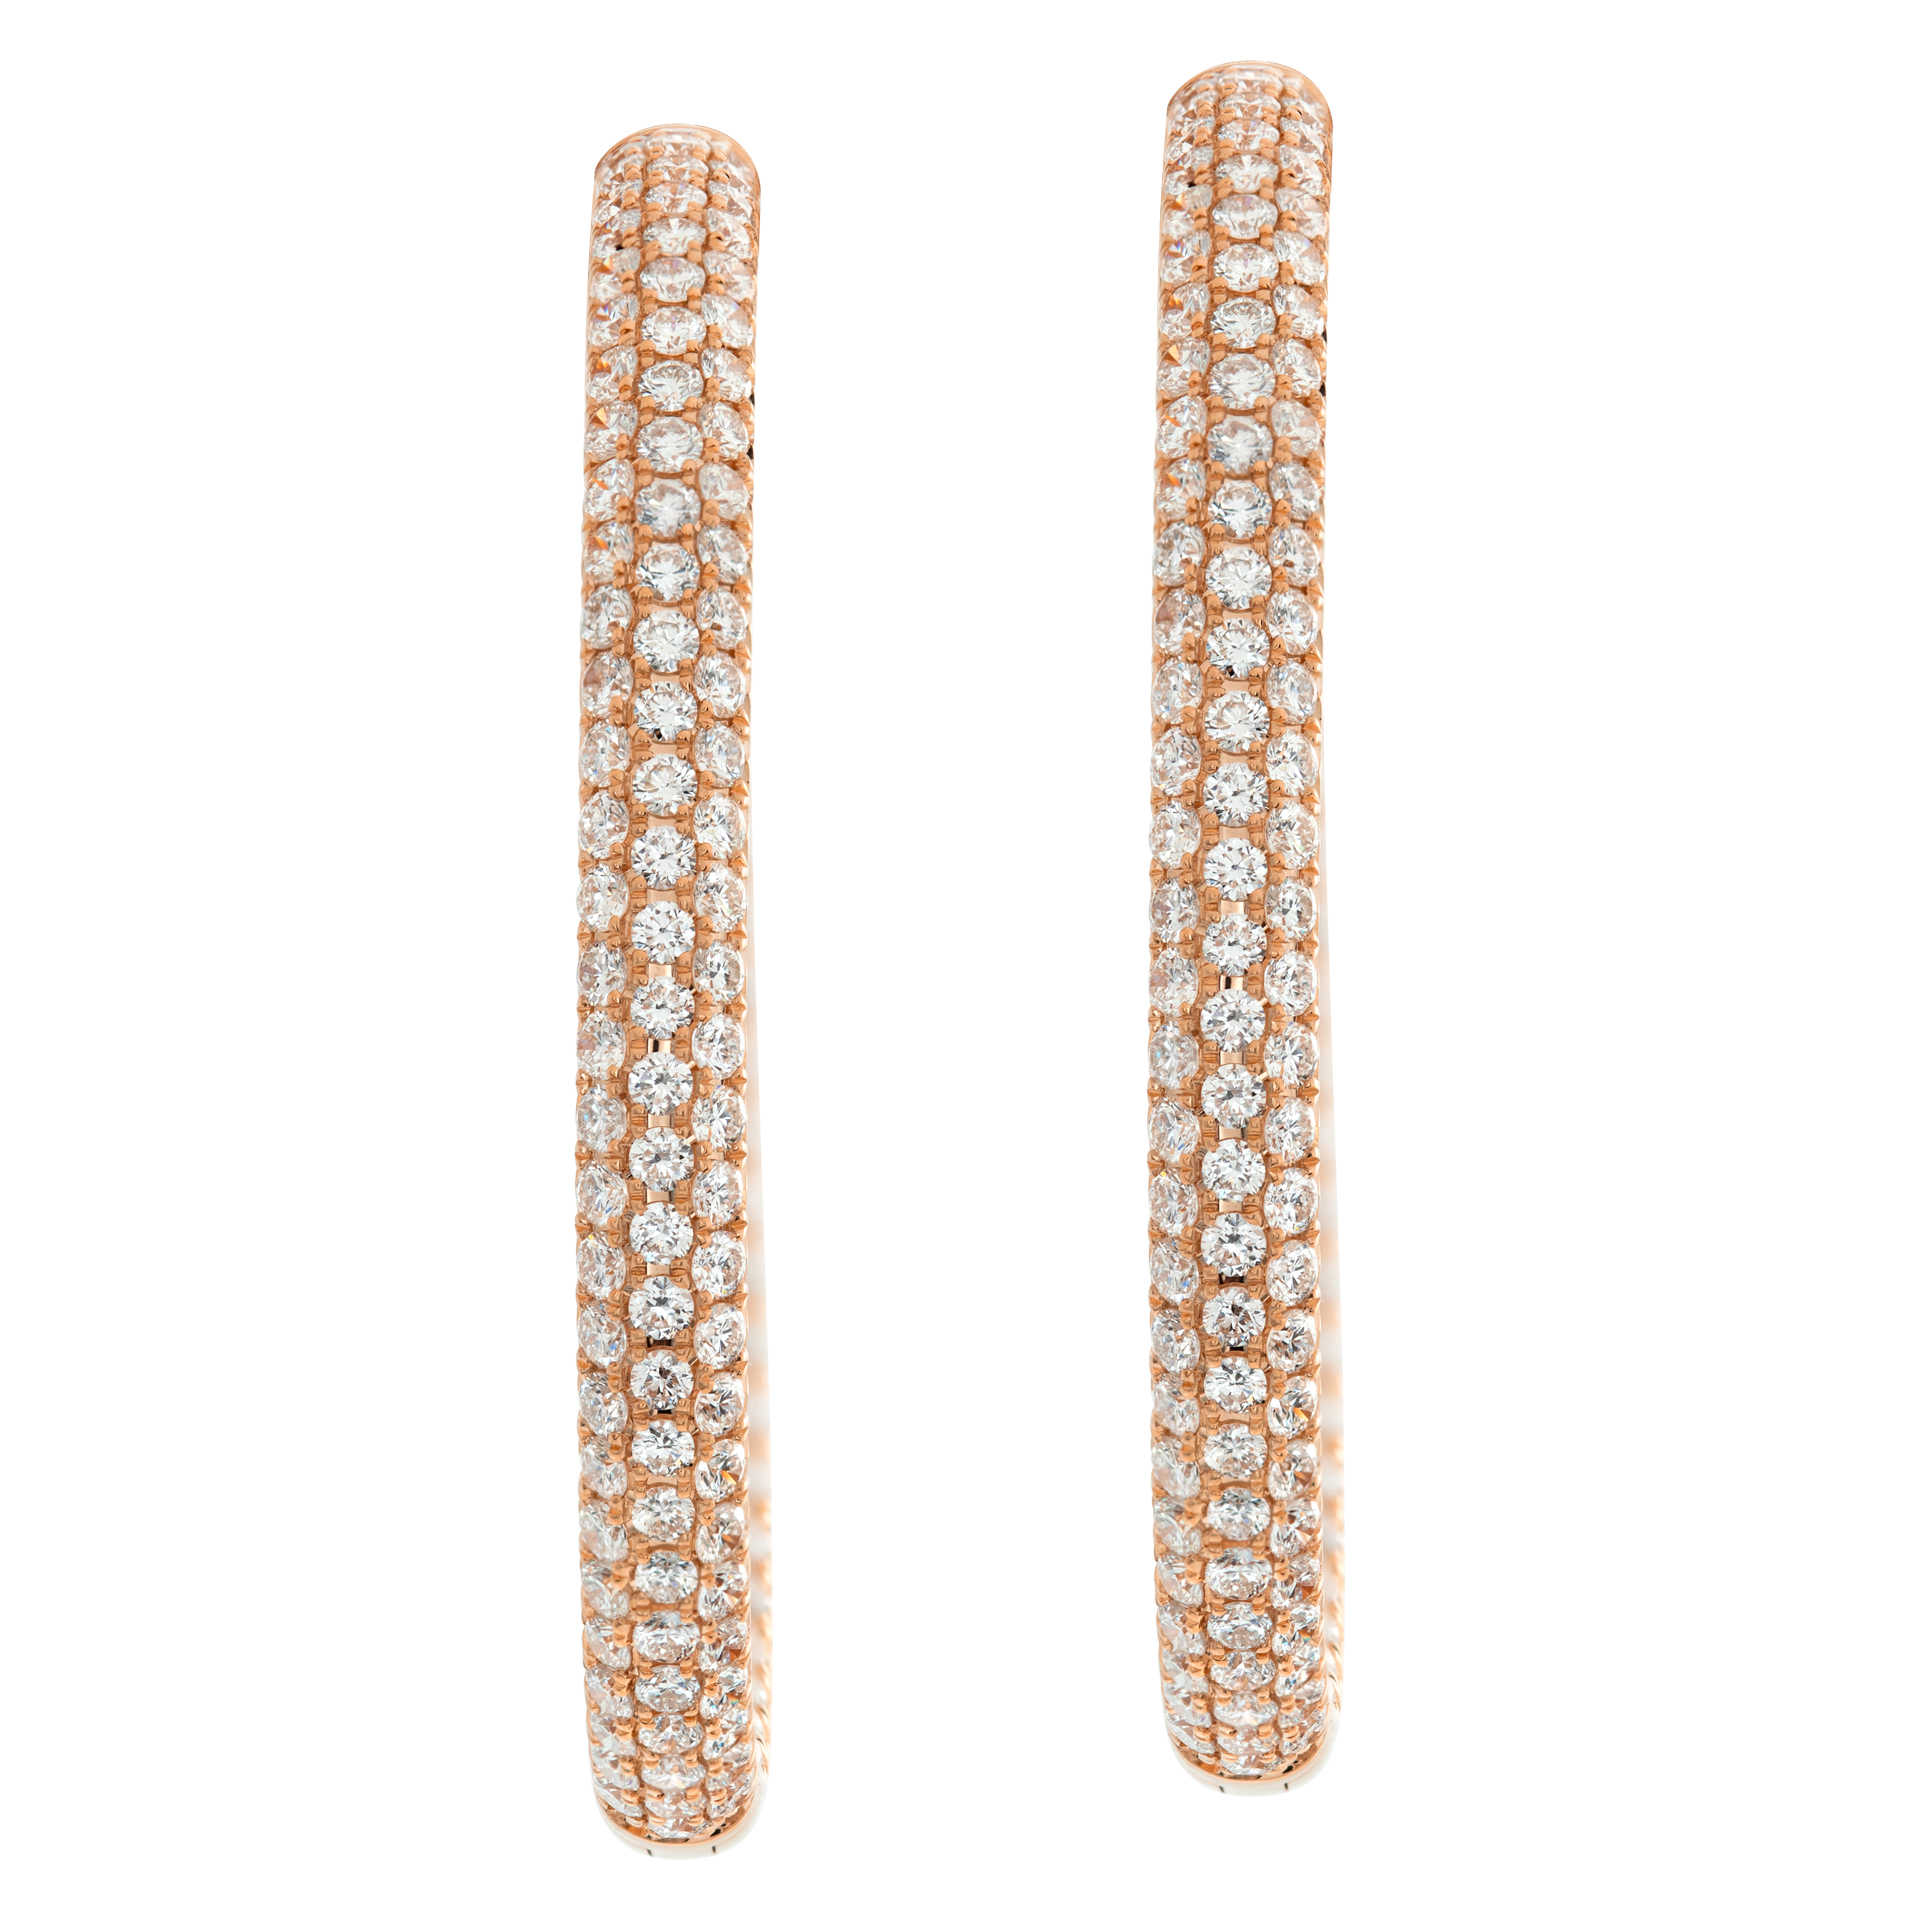 18k rose gold inside out diamond hoop earrings with 5.63 carats in round cut diamonds